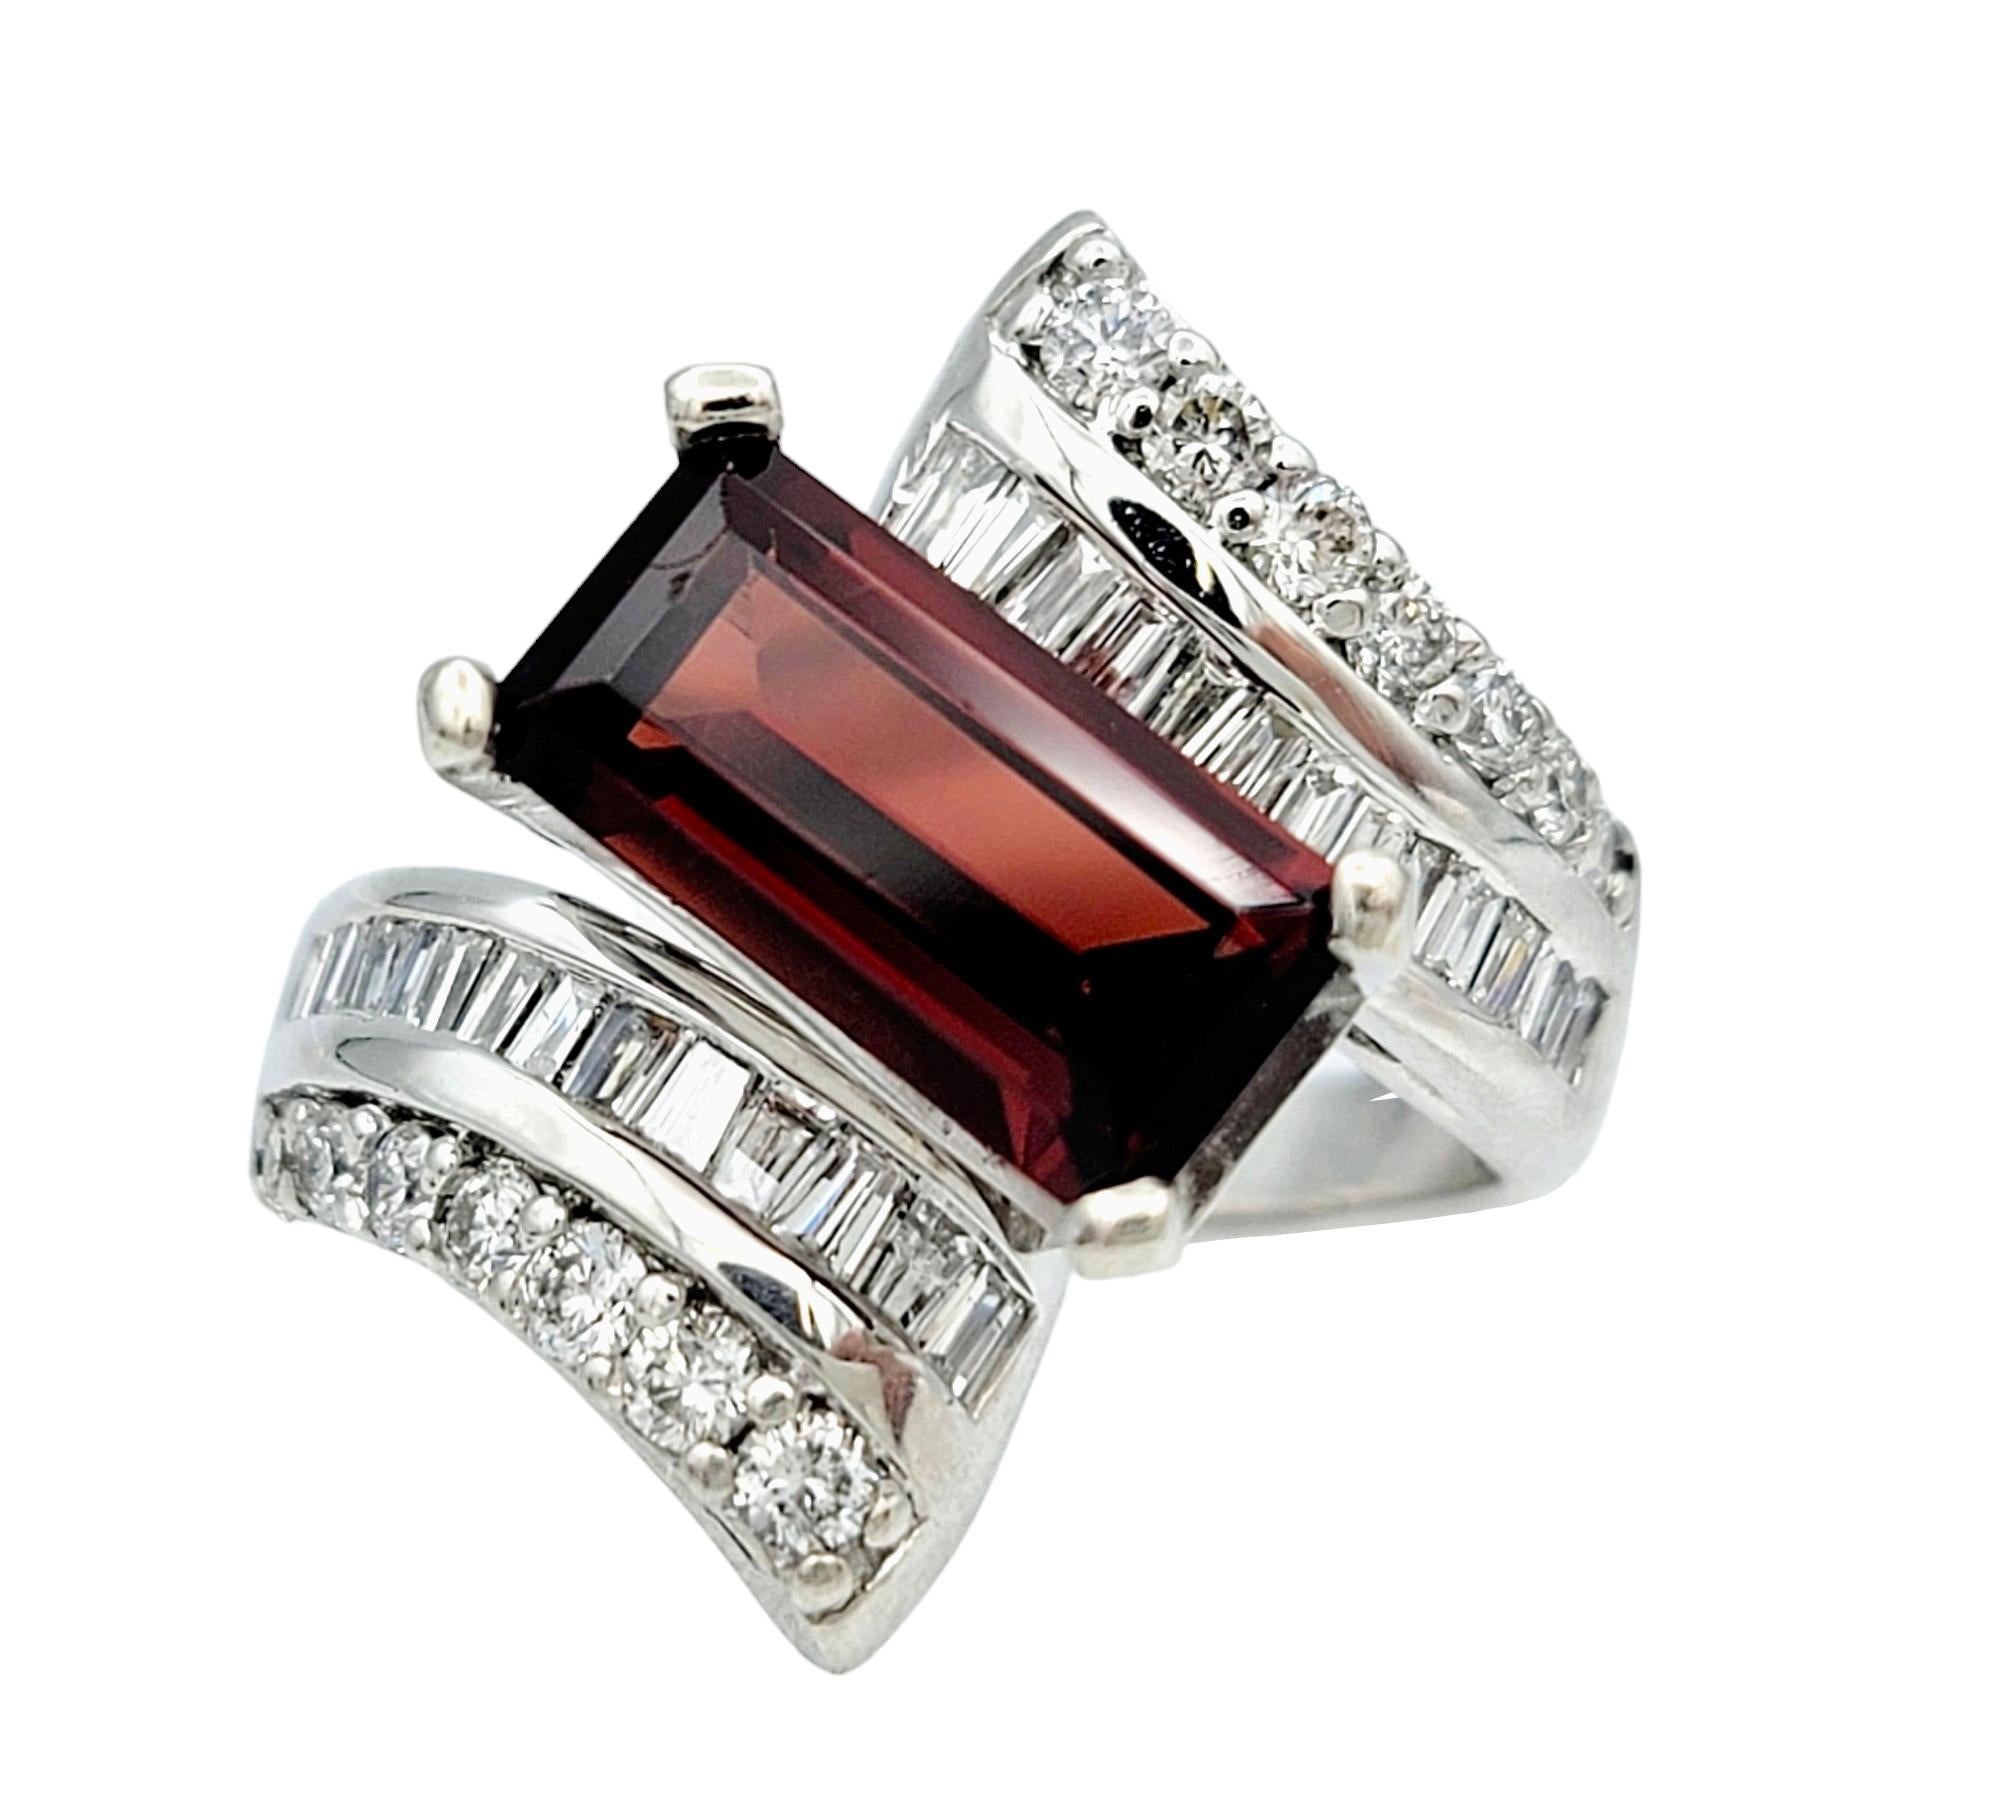 Ring size: 7.5

Indulge in the allure of sophistication with this captivating and unique band ring, meticulously crafted in lustrous 14k white gold. At its core lies a striking elongated rectangular step-cut garnet, exuding rich, deep hues that